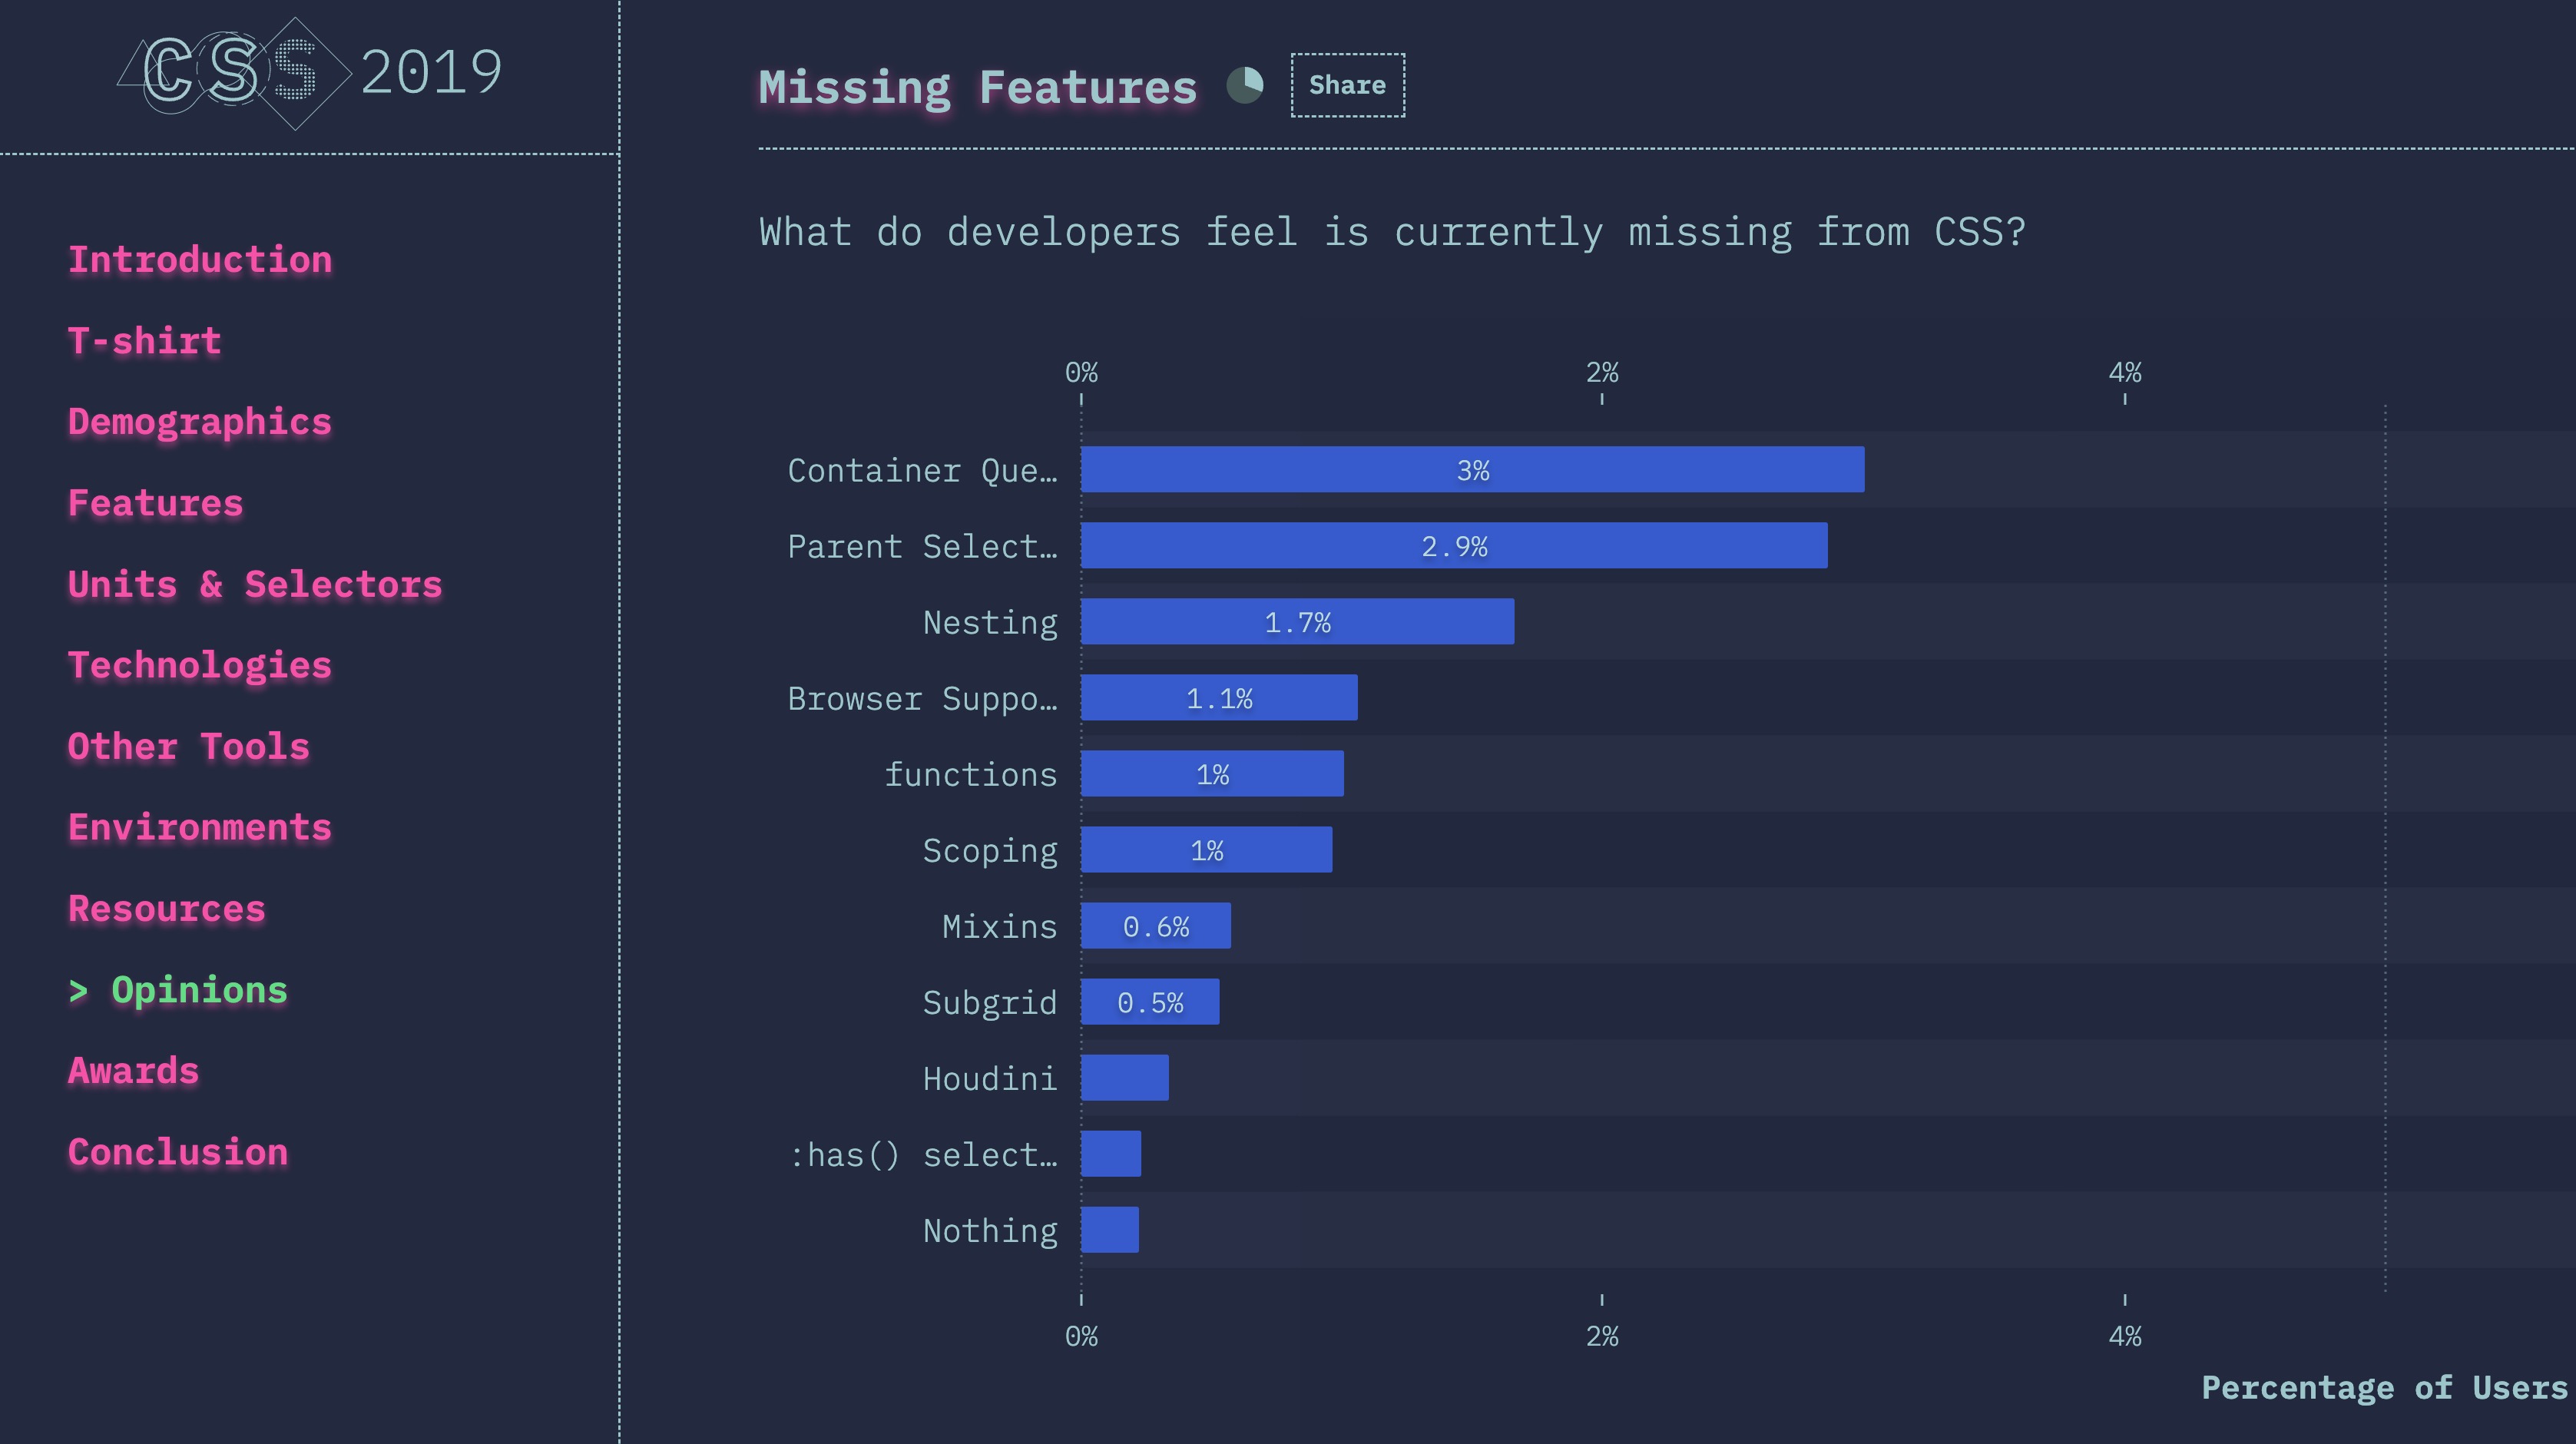 State of CSS 2019 survey results
for missing features,
with container queries at the top (3%),
then parent selector, nesting, etc.
